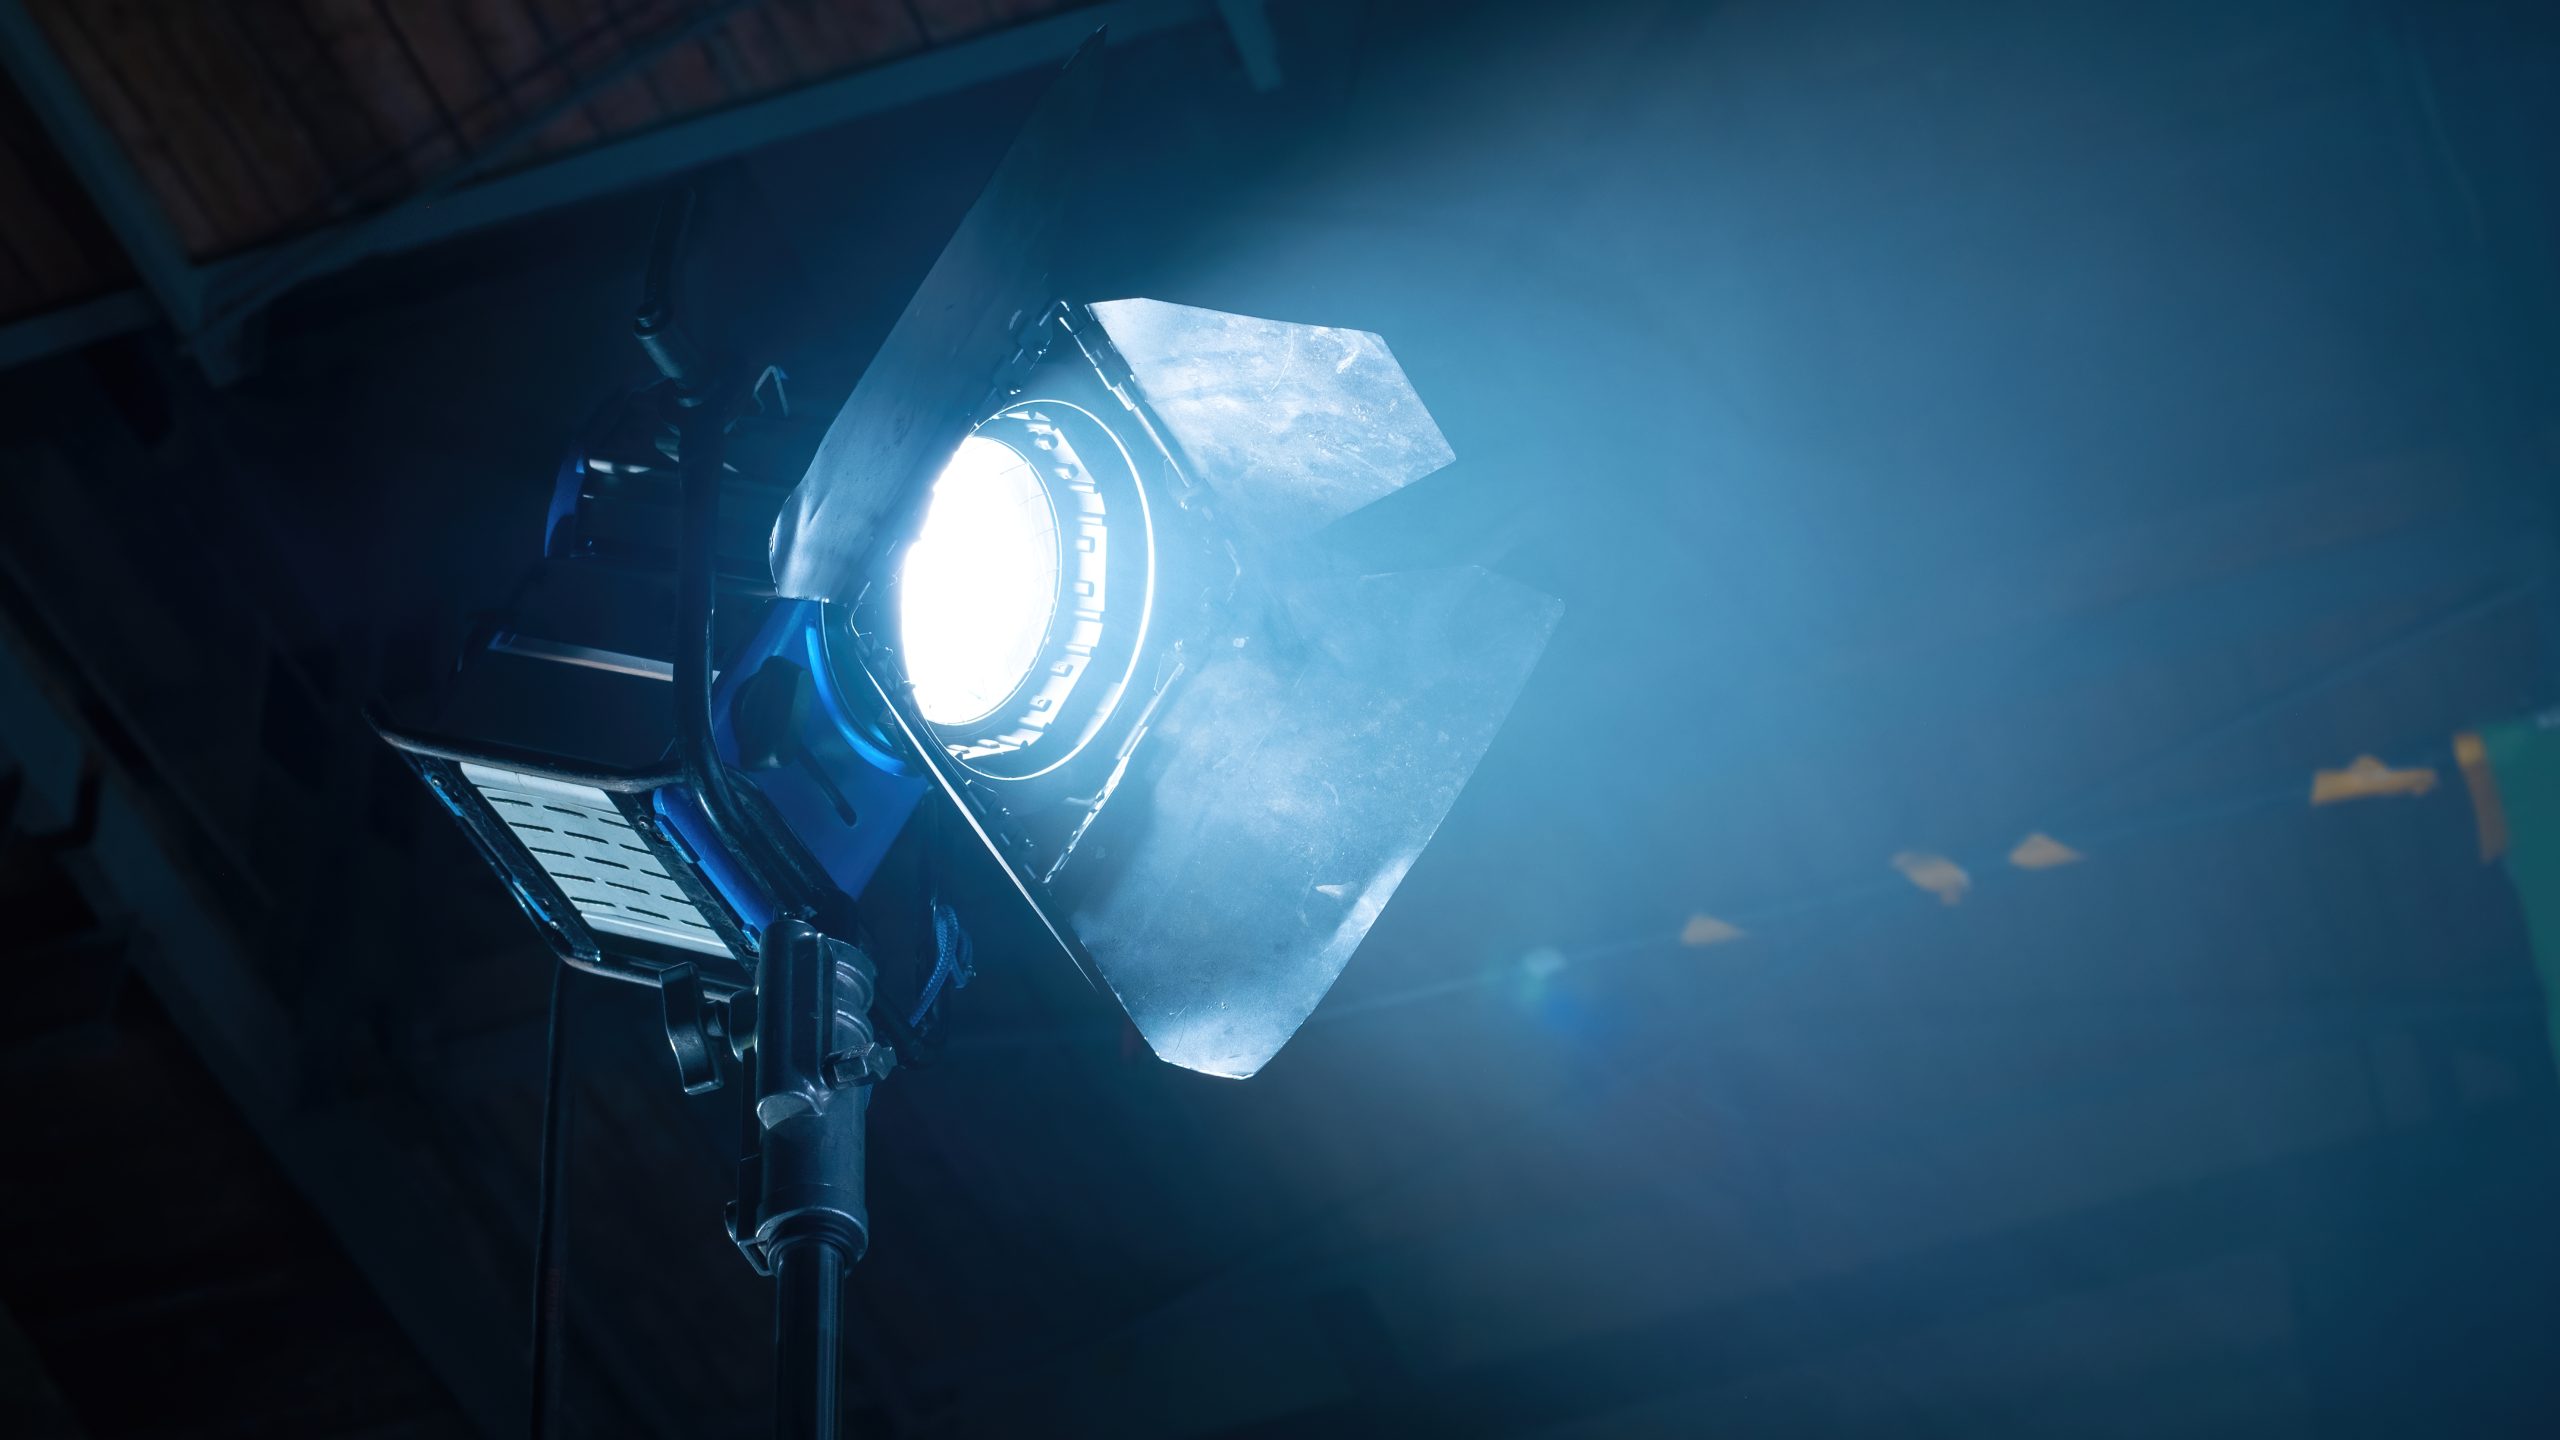 Professional lighting equipment on the movie set with smoke in the air